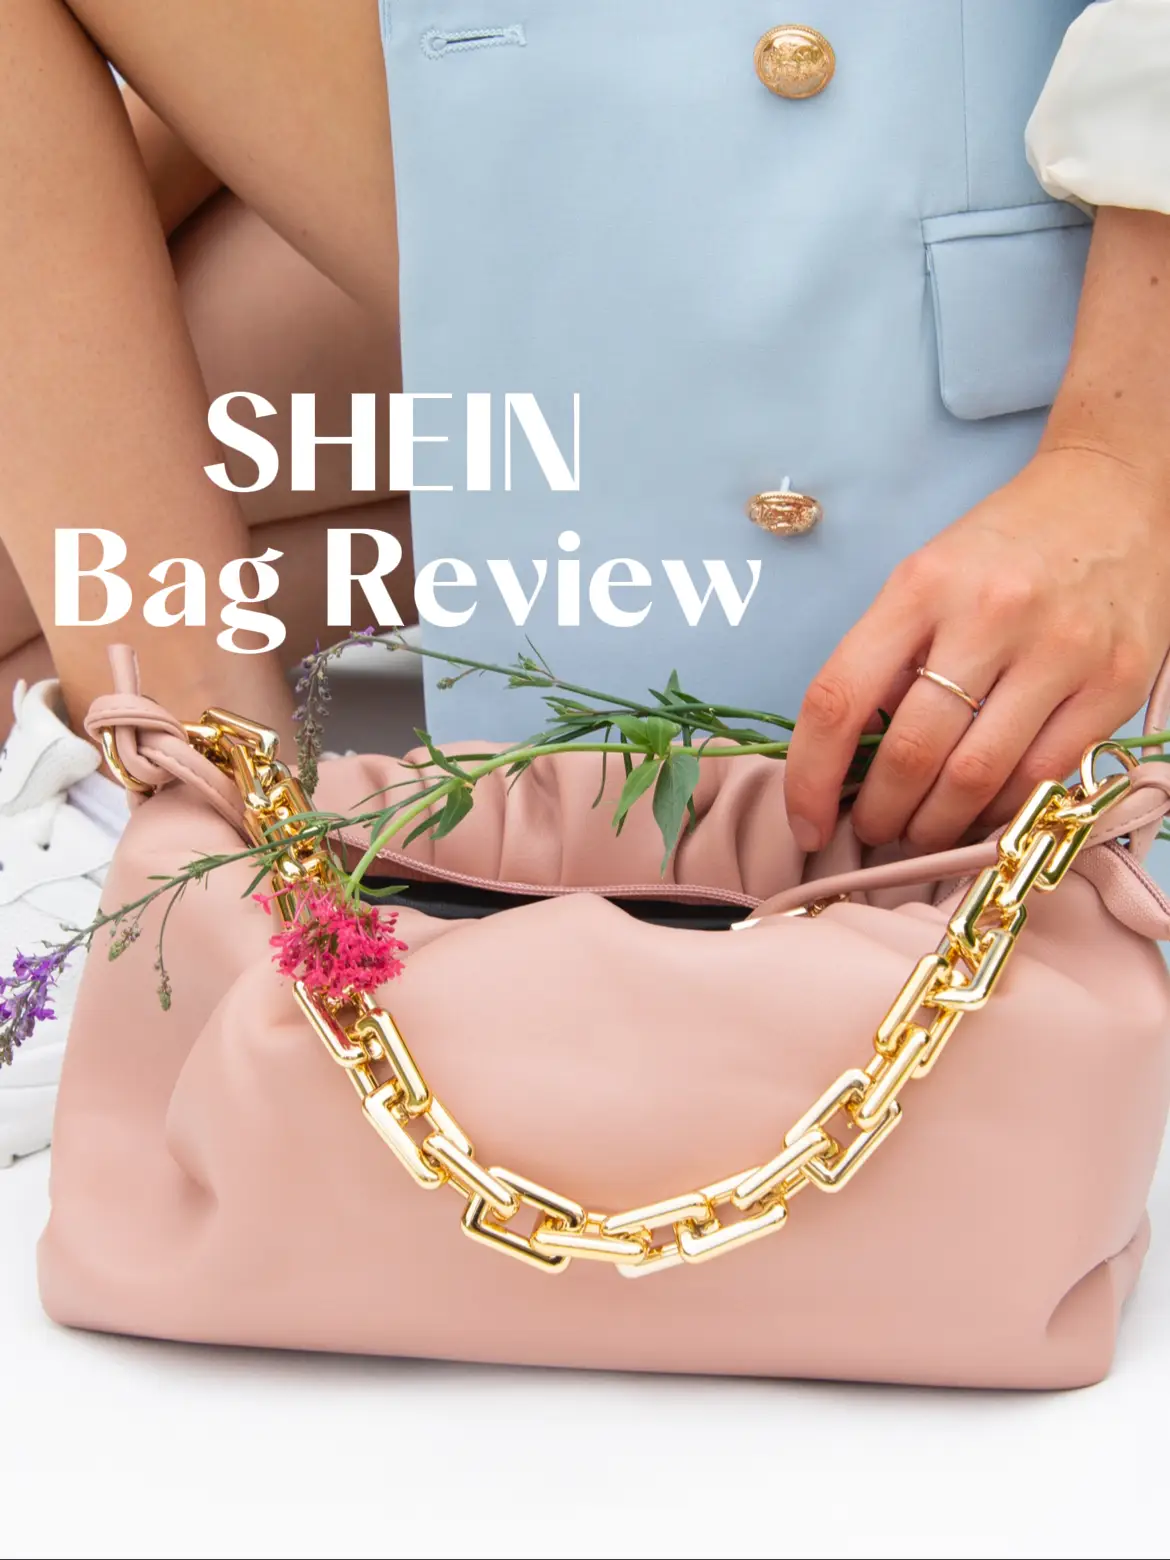 SHEIN BAG REVIEW 🖤, Gallery posted by Becki Ball